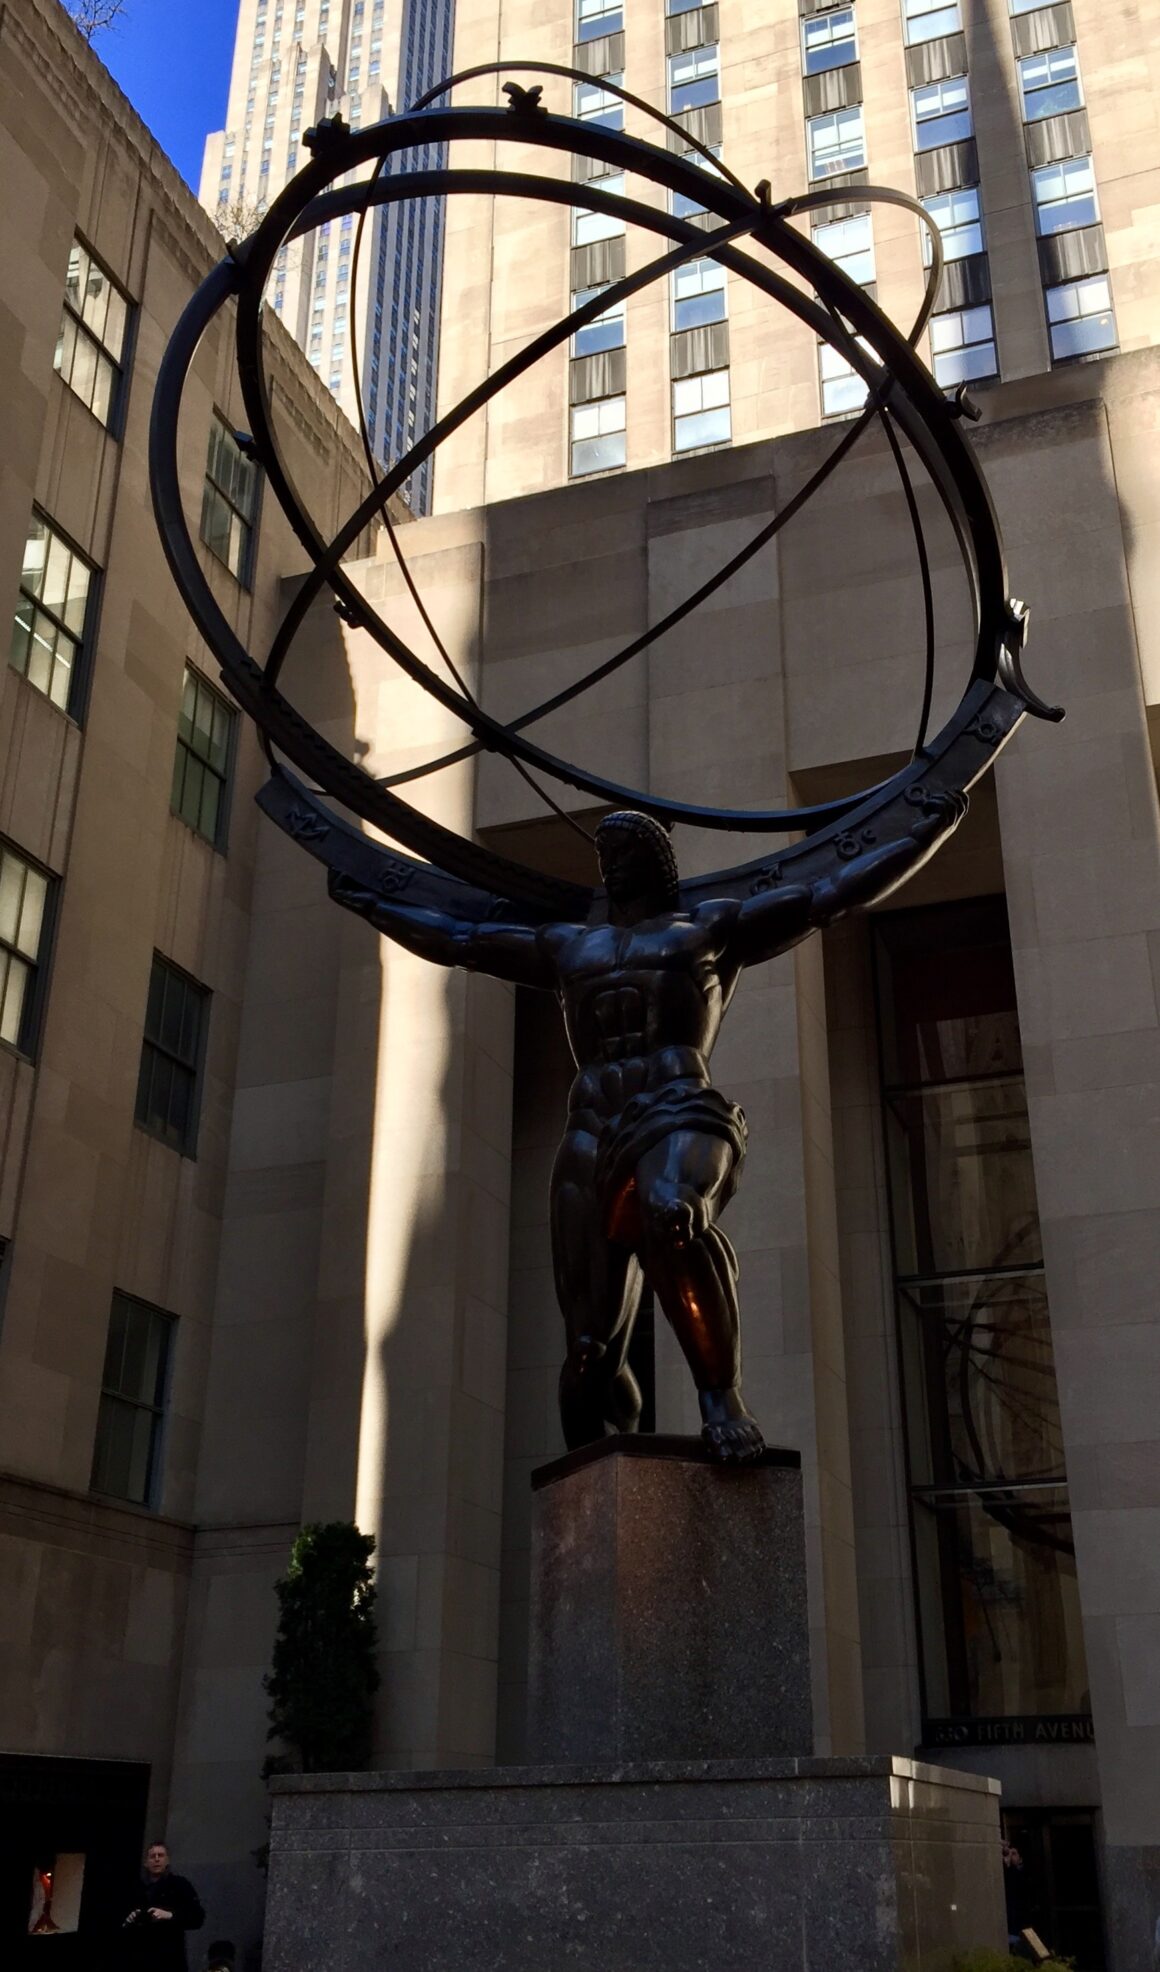 30 Rockefeller Plaza, one of the best free things to do in New York City.